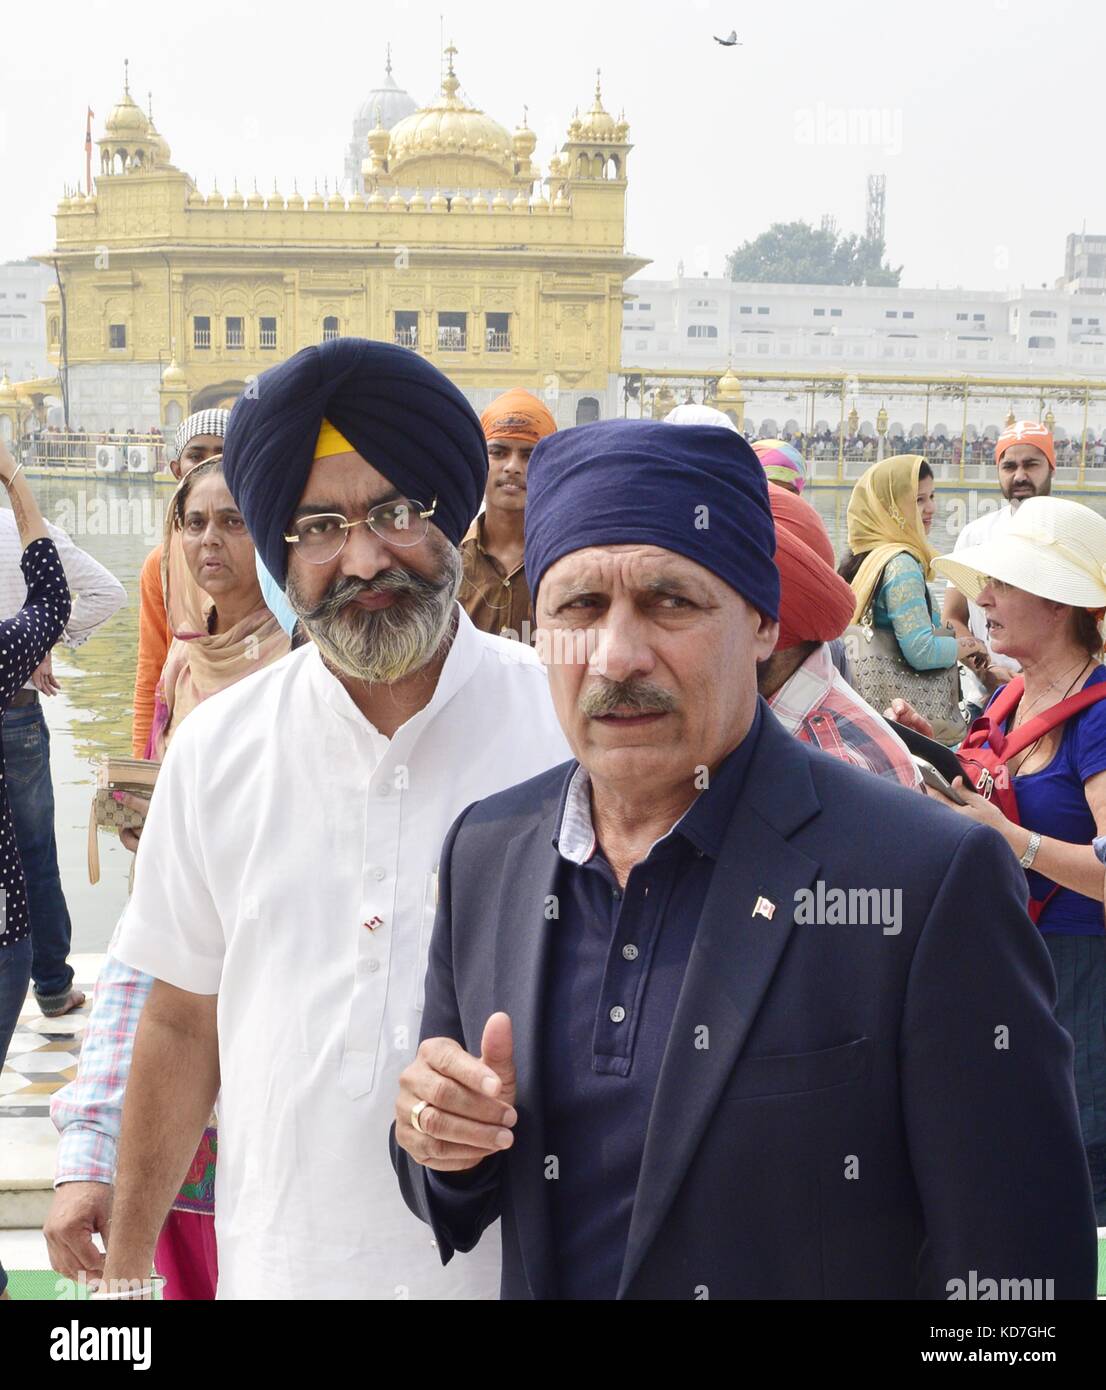 Amritsar, India. 10th October, 2017. Member of Parliament from Canada Jatinder Singh Sidhu (R) with others paying obeisance at Golden Temple during his visit. Photo Credit: Sameer Sehgal/Newscom/Alamy Live News Stock Photo